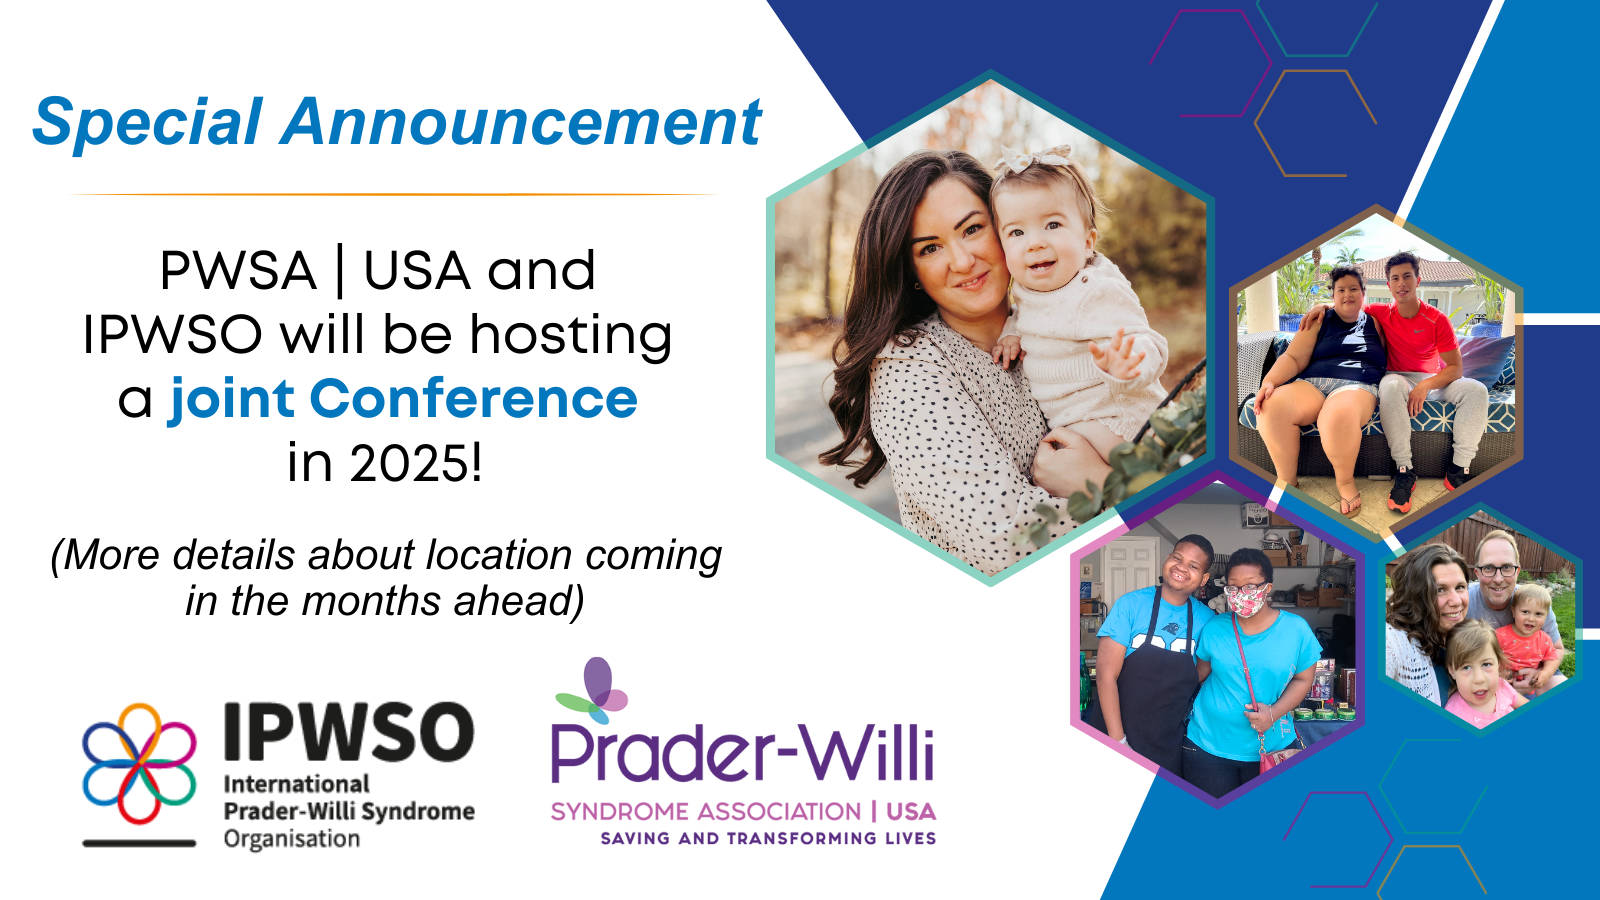 PWSA | USA and IPWSO will be holding a joint conference in 2025!